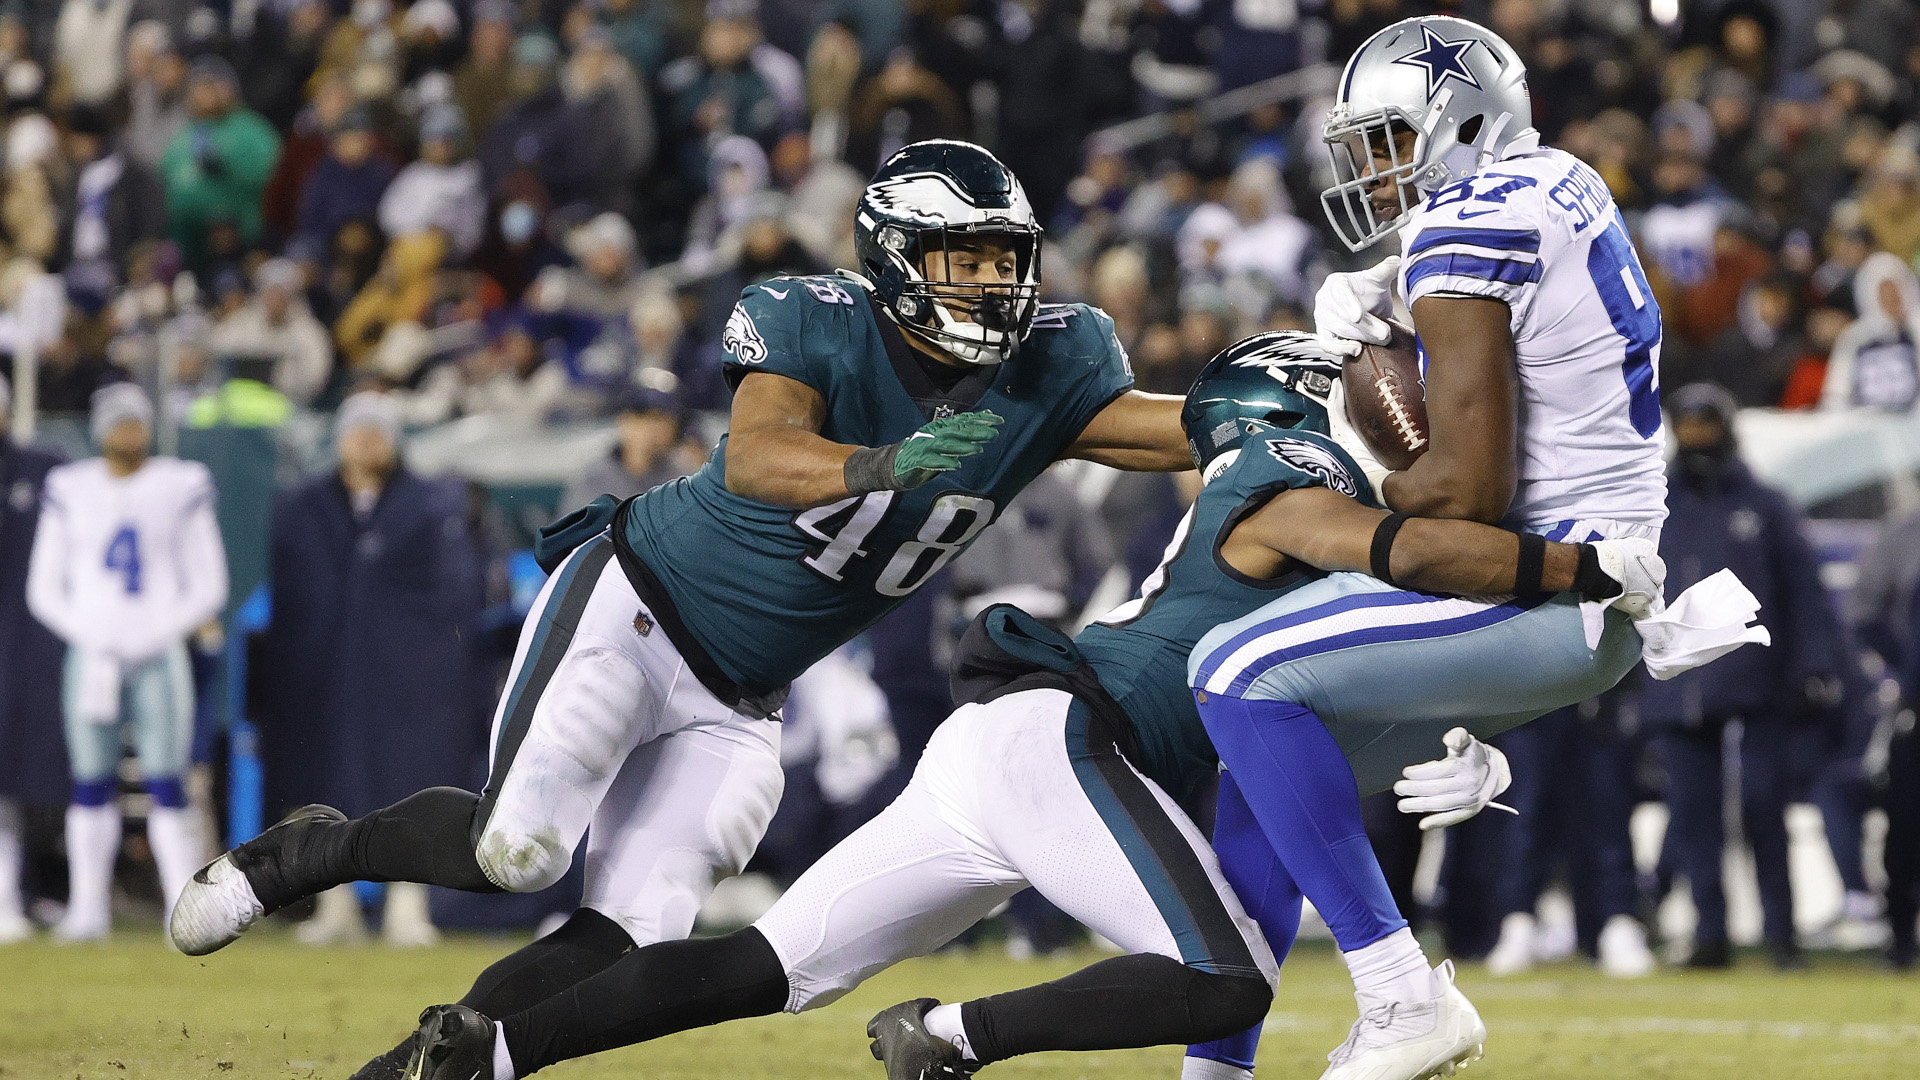 Cowboys vs Eagles live stream: how to watch NFL online from anywhere